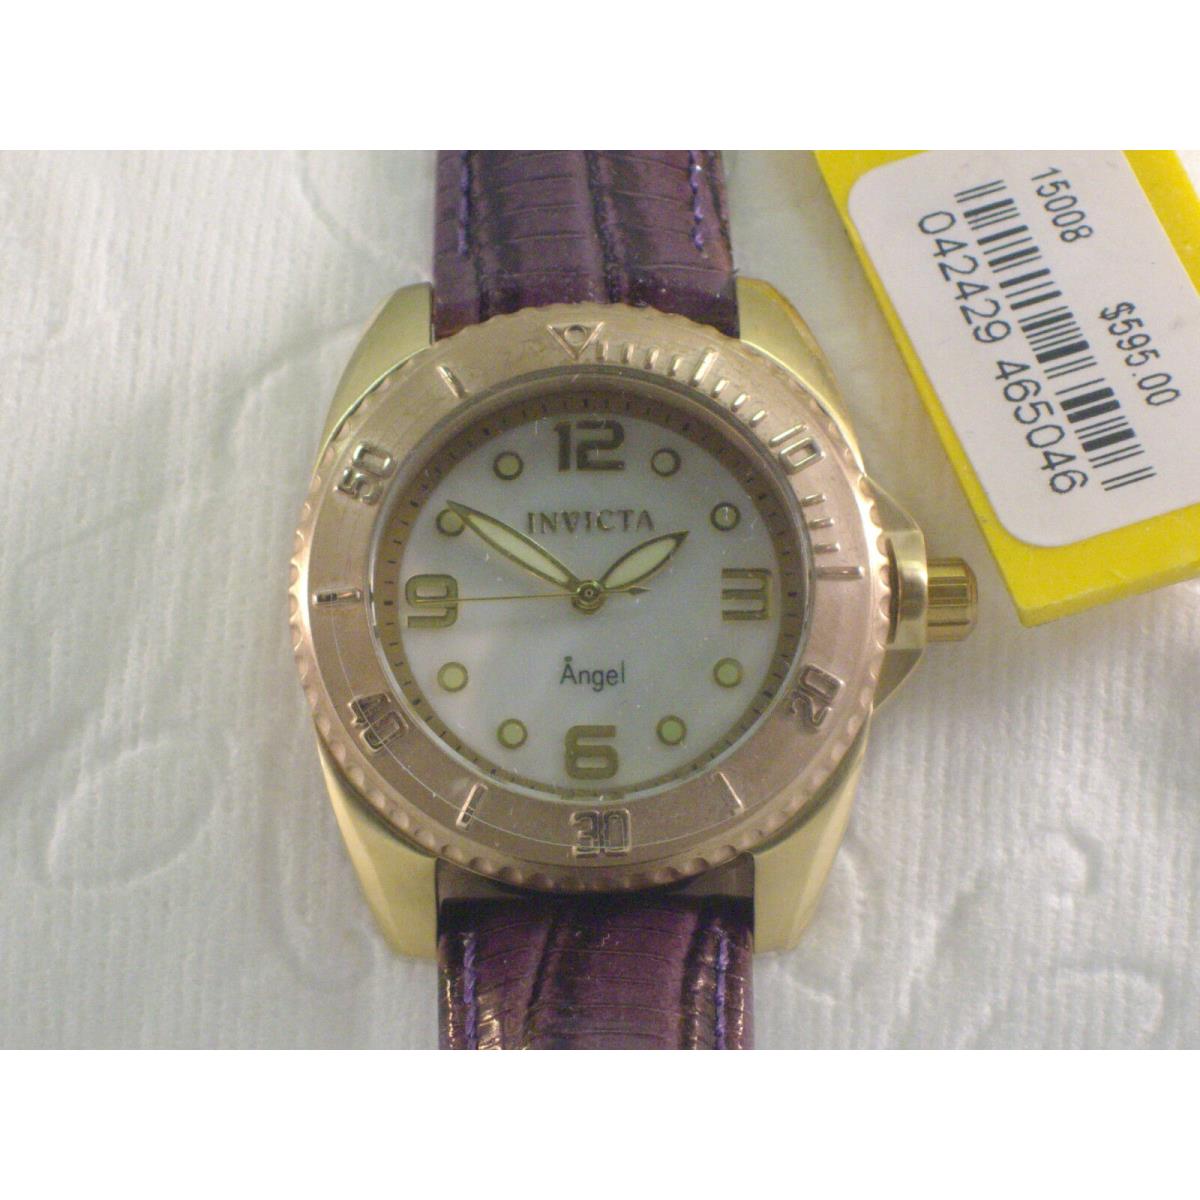 Invicta watch  - Ivory Dial, Black Band